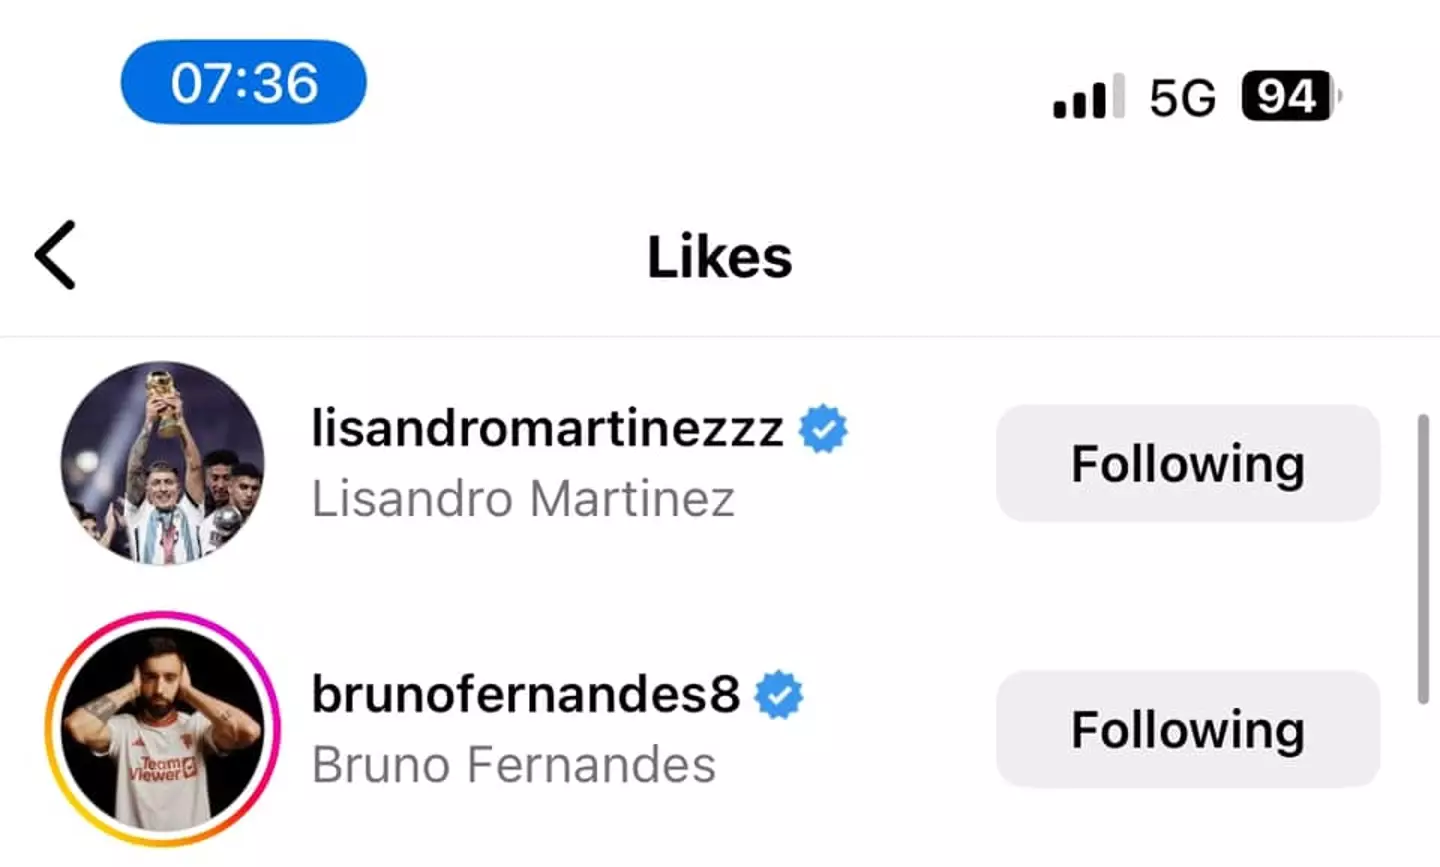 Fernandes and Martinez's likes on the post. (Image